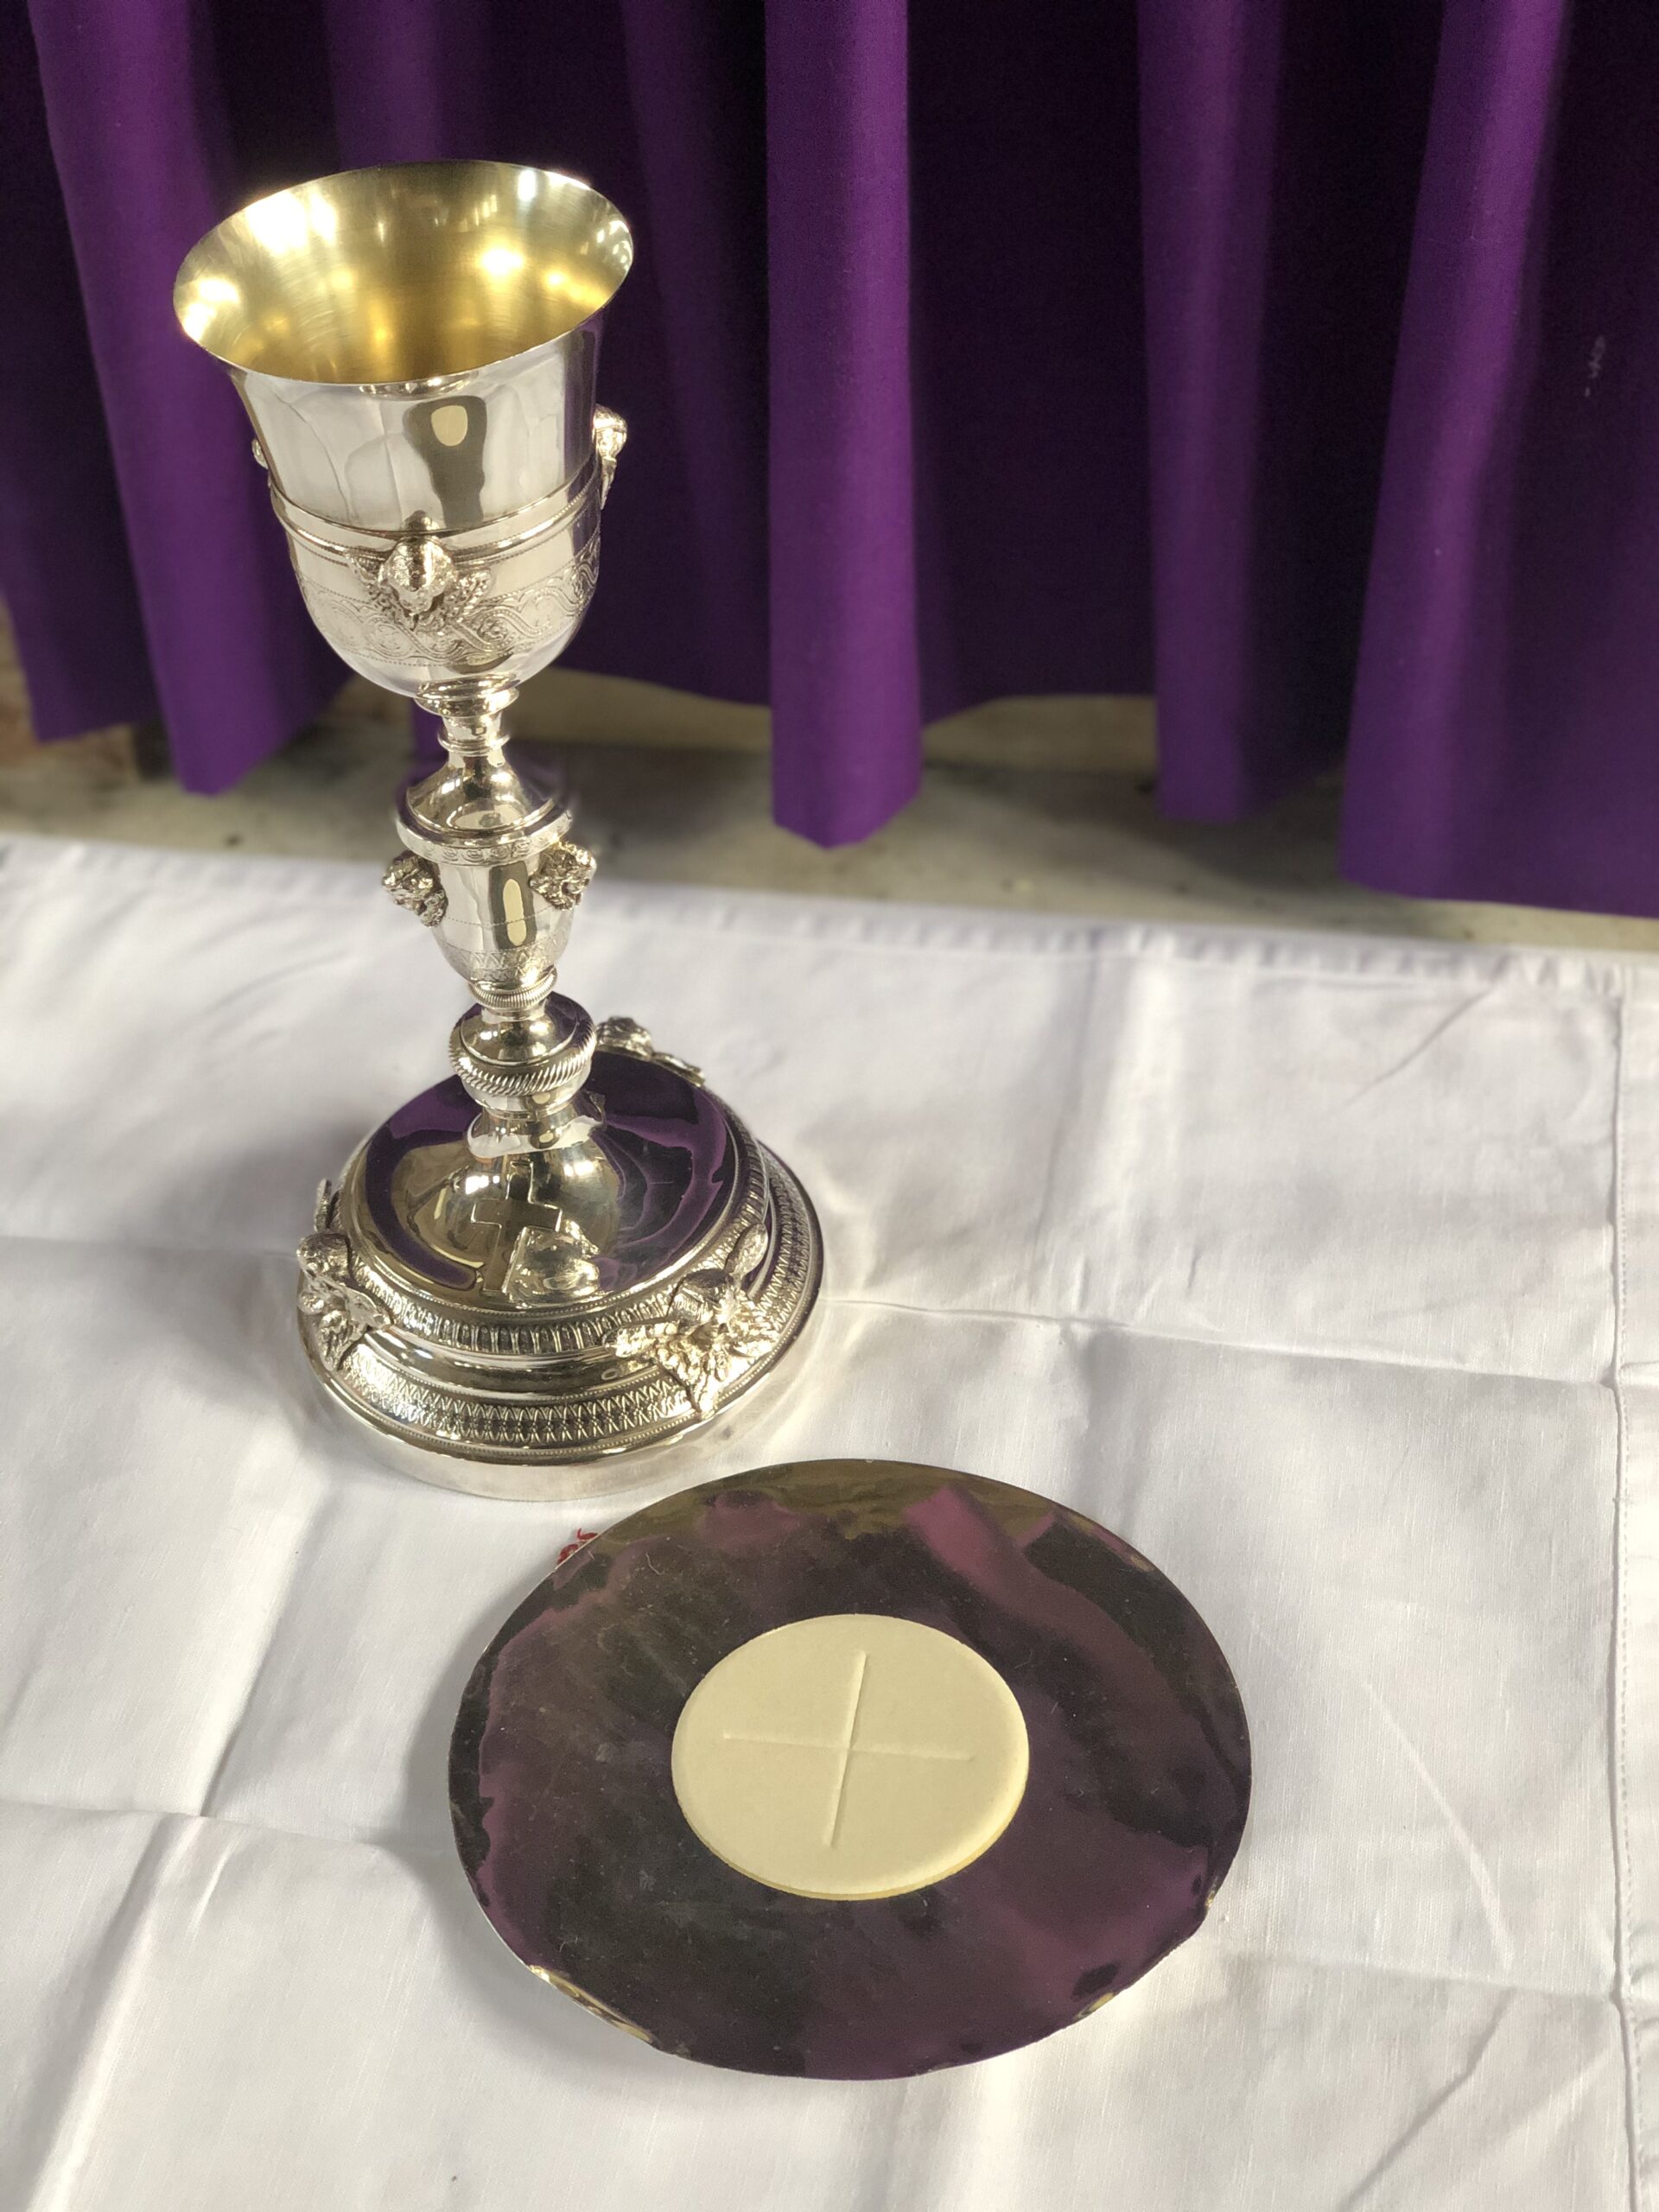 A chalice and paten, used for the celebration of Holy Mass.